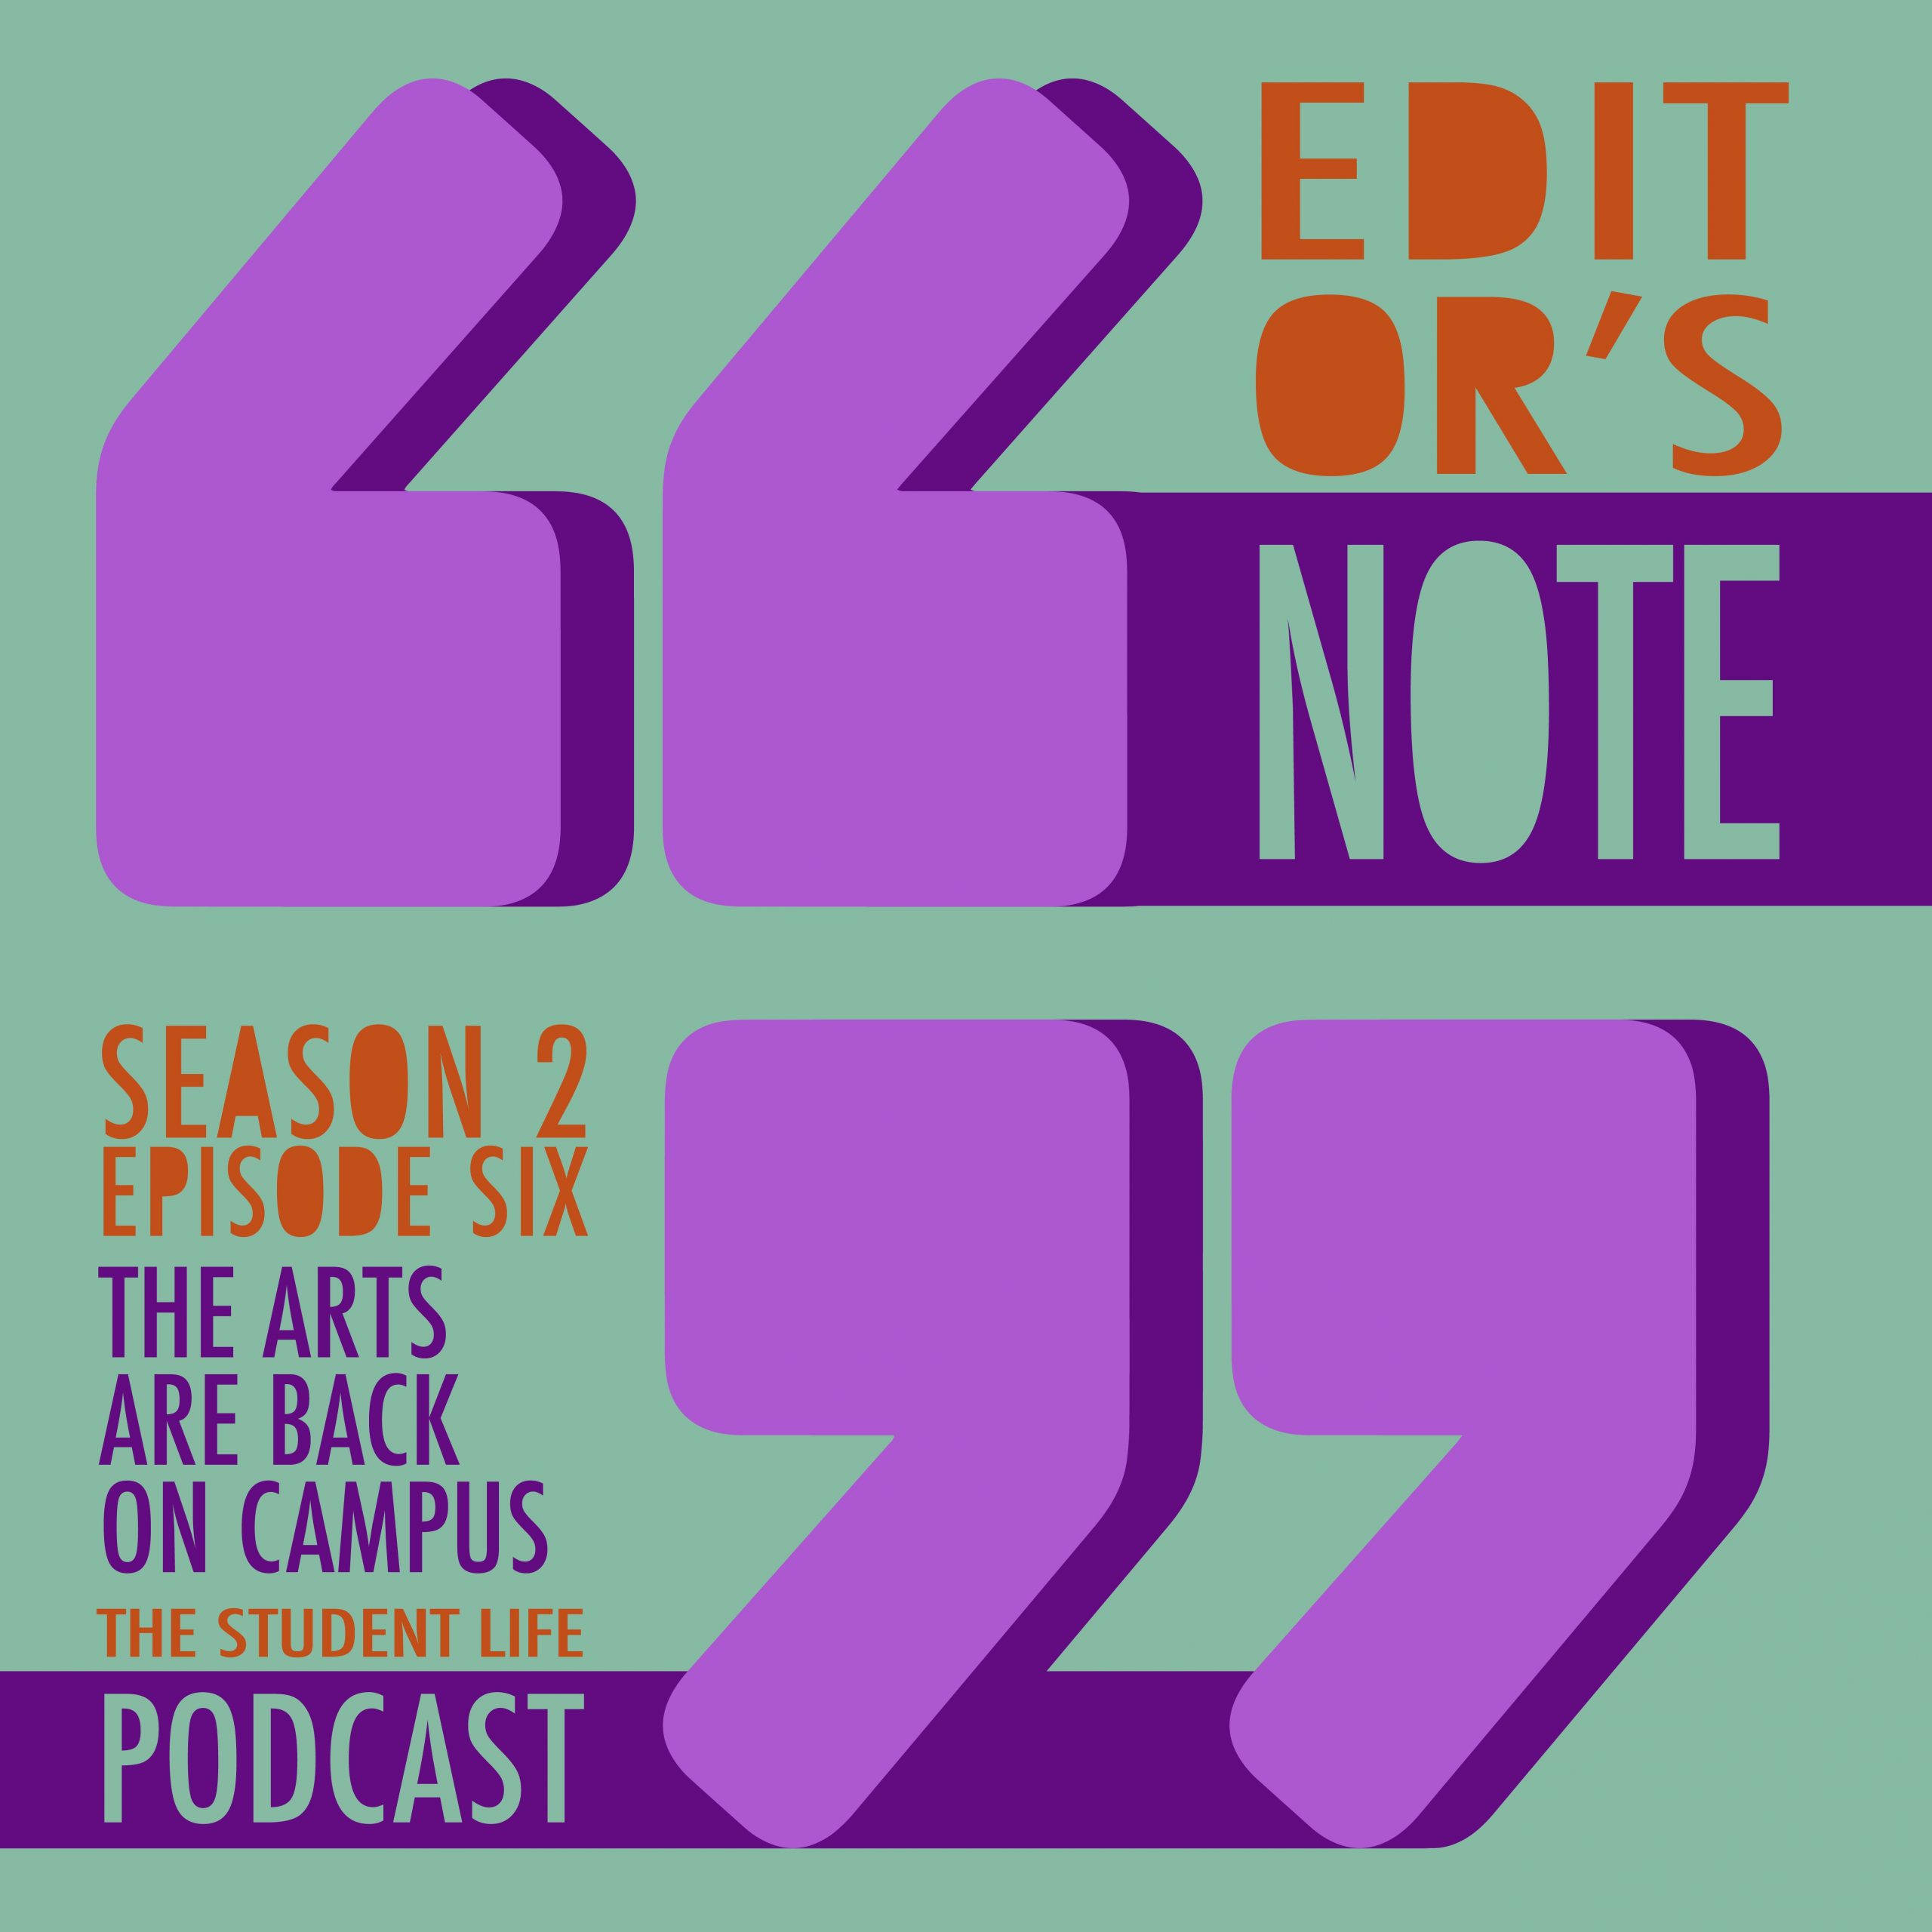 A graphic with two large purple quotation marks in the center in front of a lime green background. In the upper right hand corner, orange and green letters read "Editor's Note." In the lower left hand corner, purple and green letters read "Season 2 Episode Six The Arts Are Back on Campus" and "The Student Life Podcast"